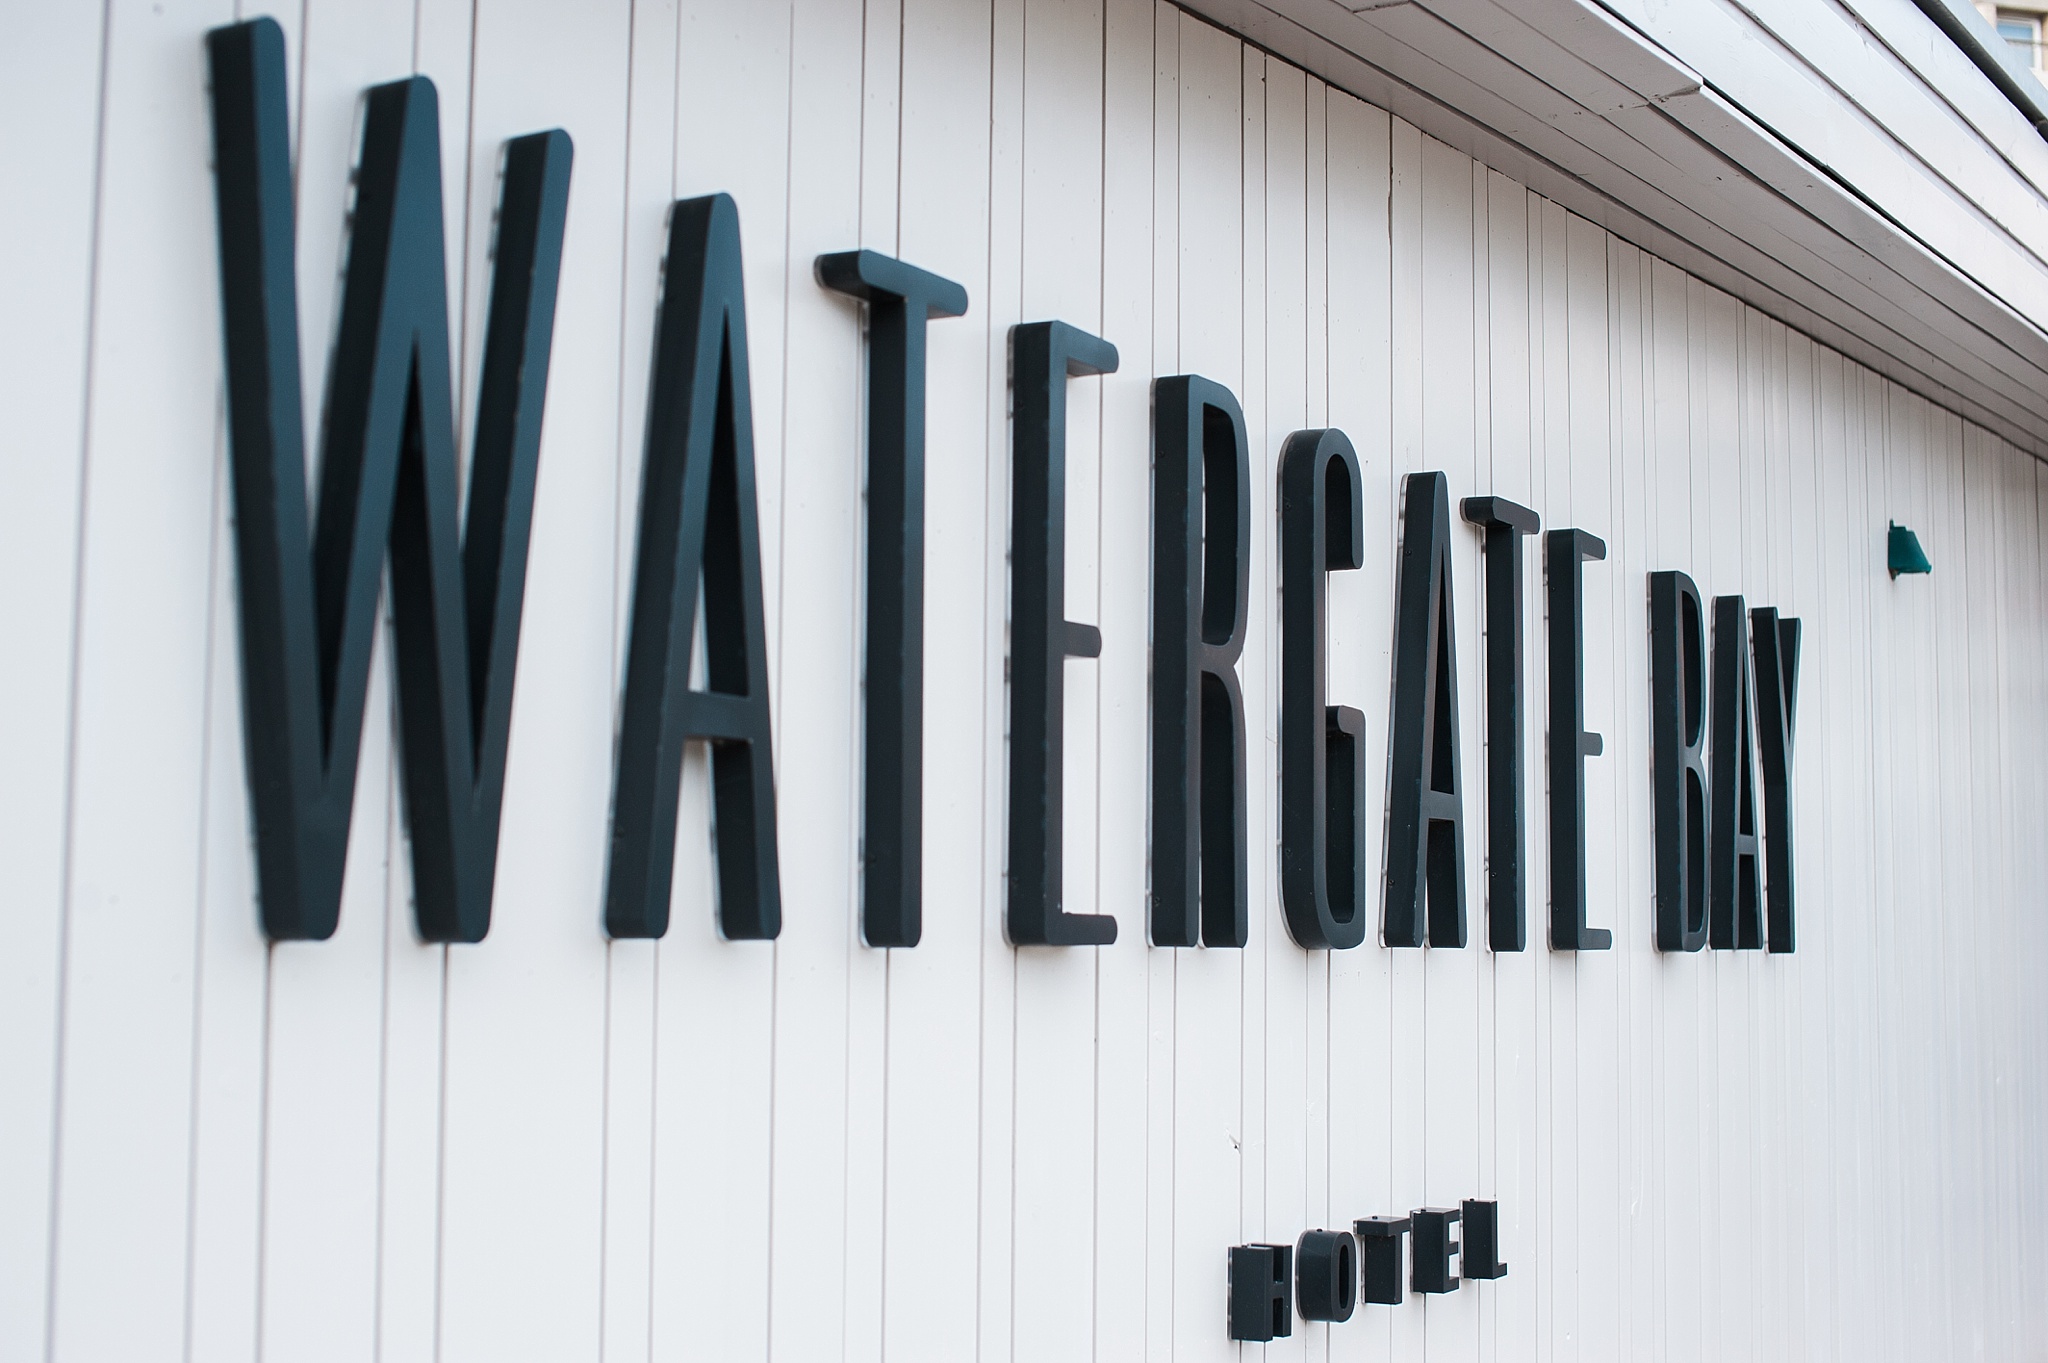 sign for the watergate bay hotel in Newquay, Cornwall